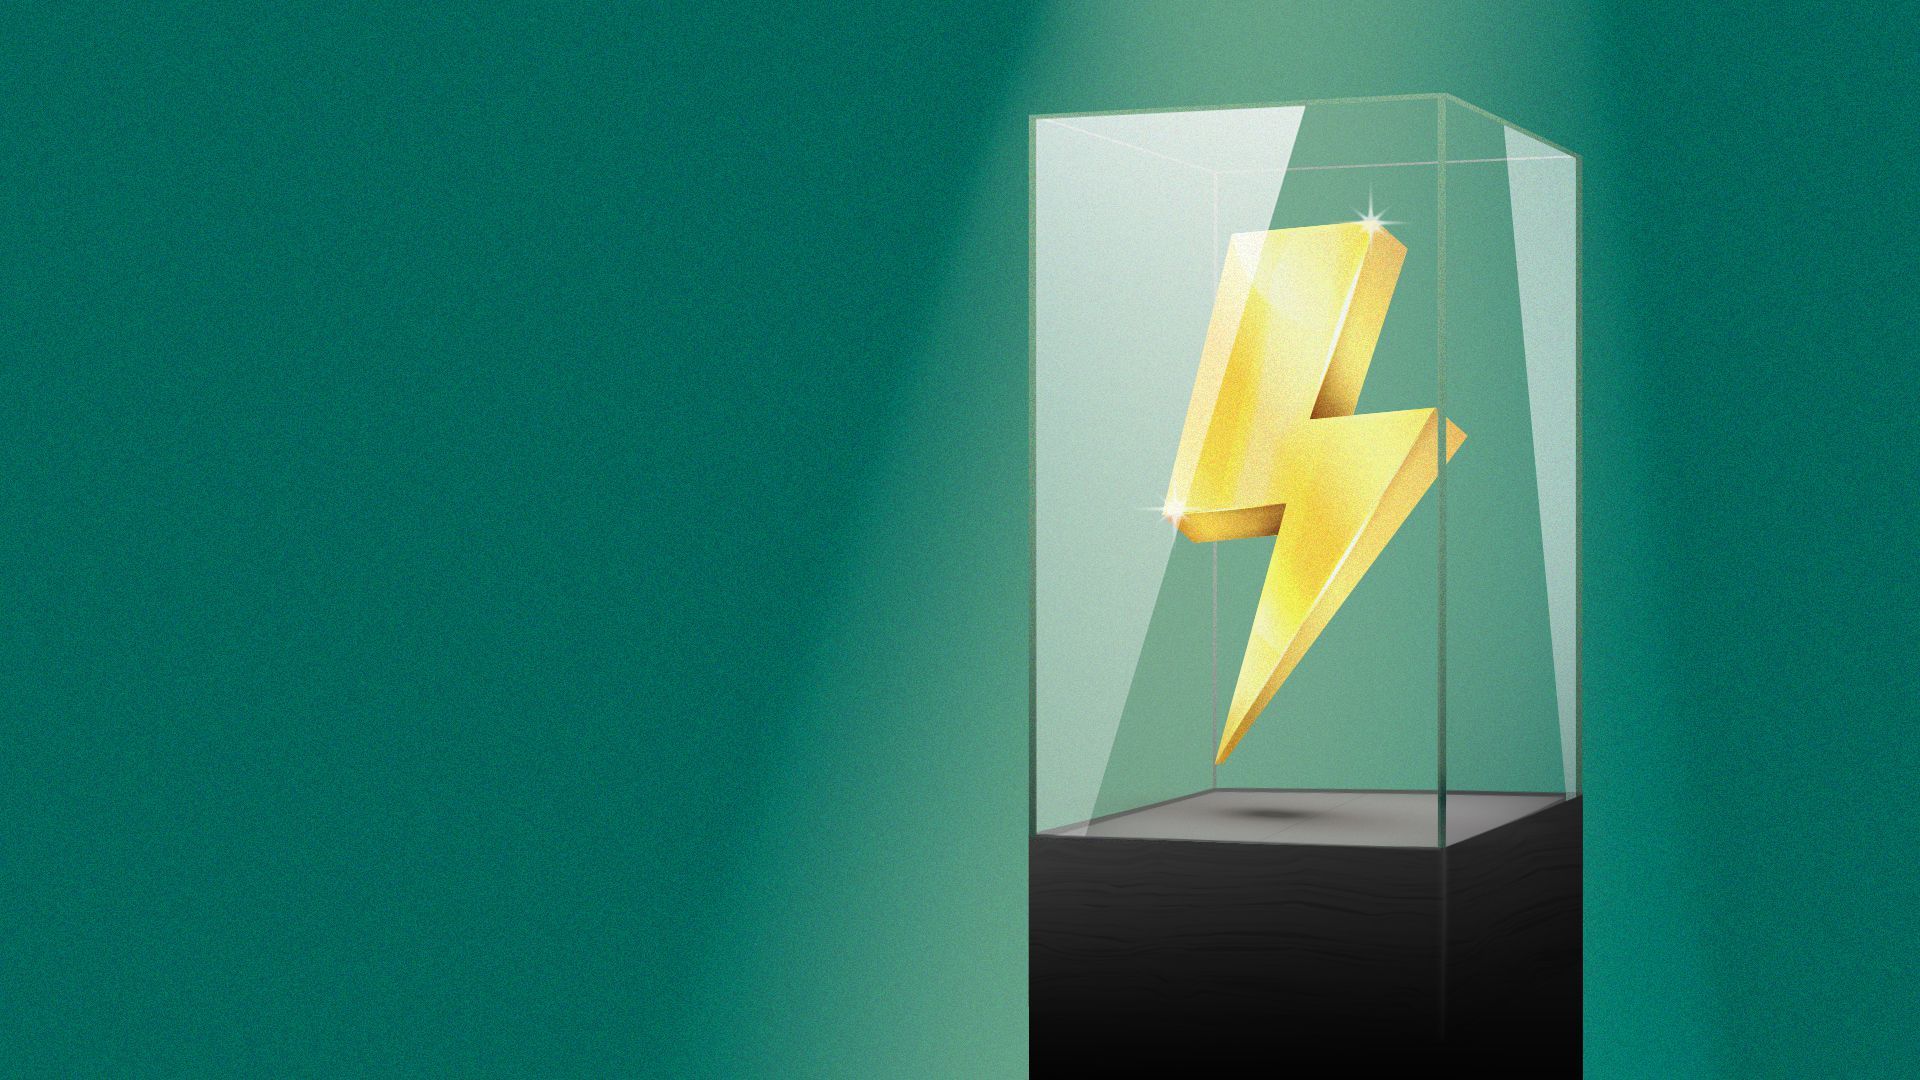 Illustration of an energy lightning bolt in a glass display case.